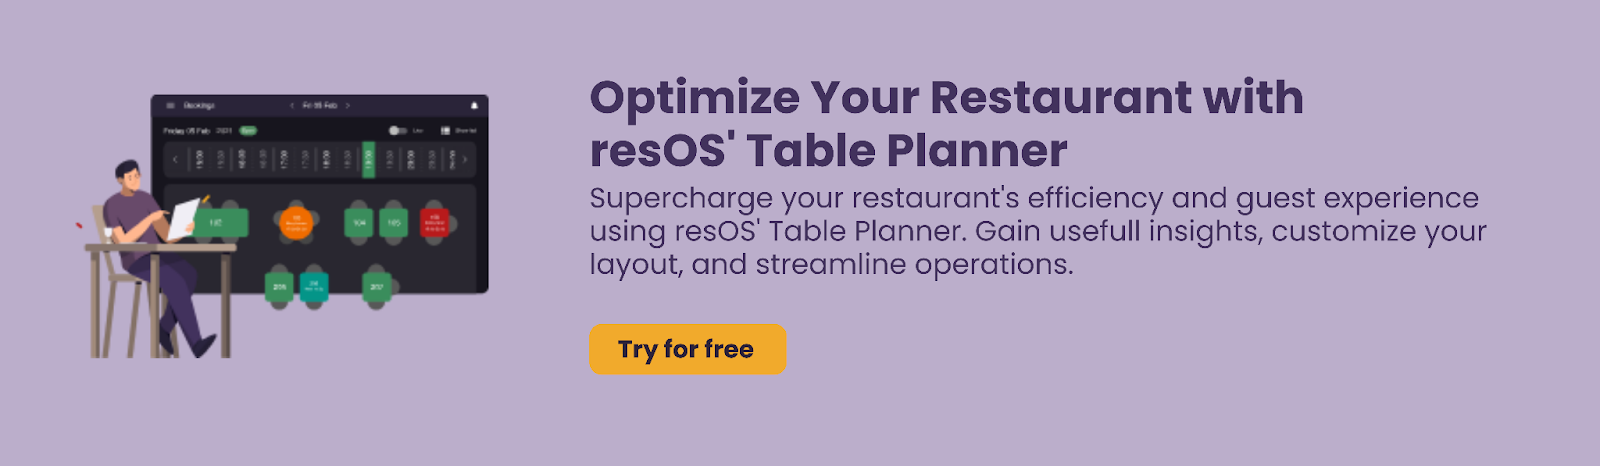 See table planner option here - button